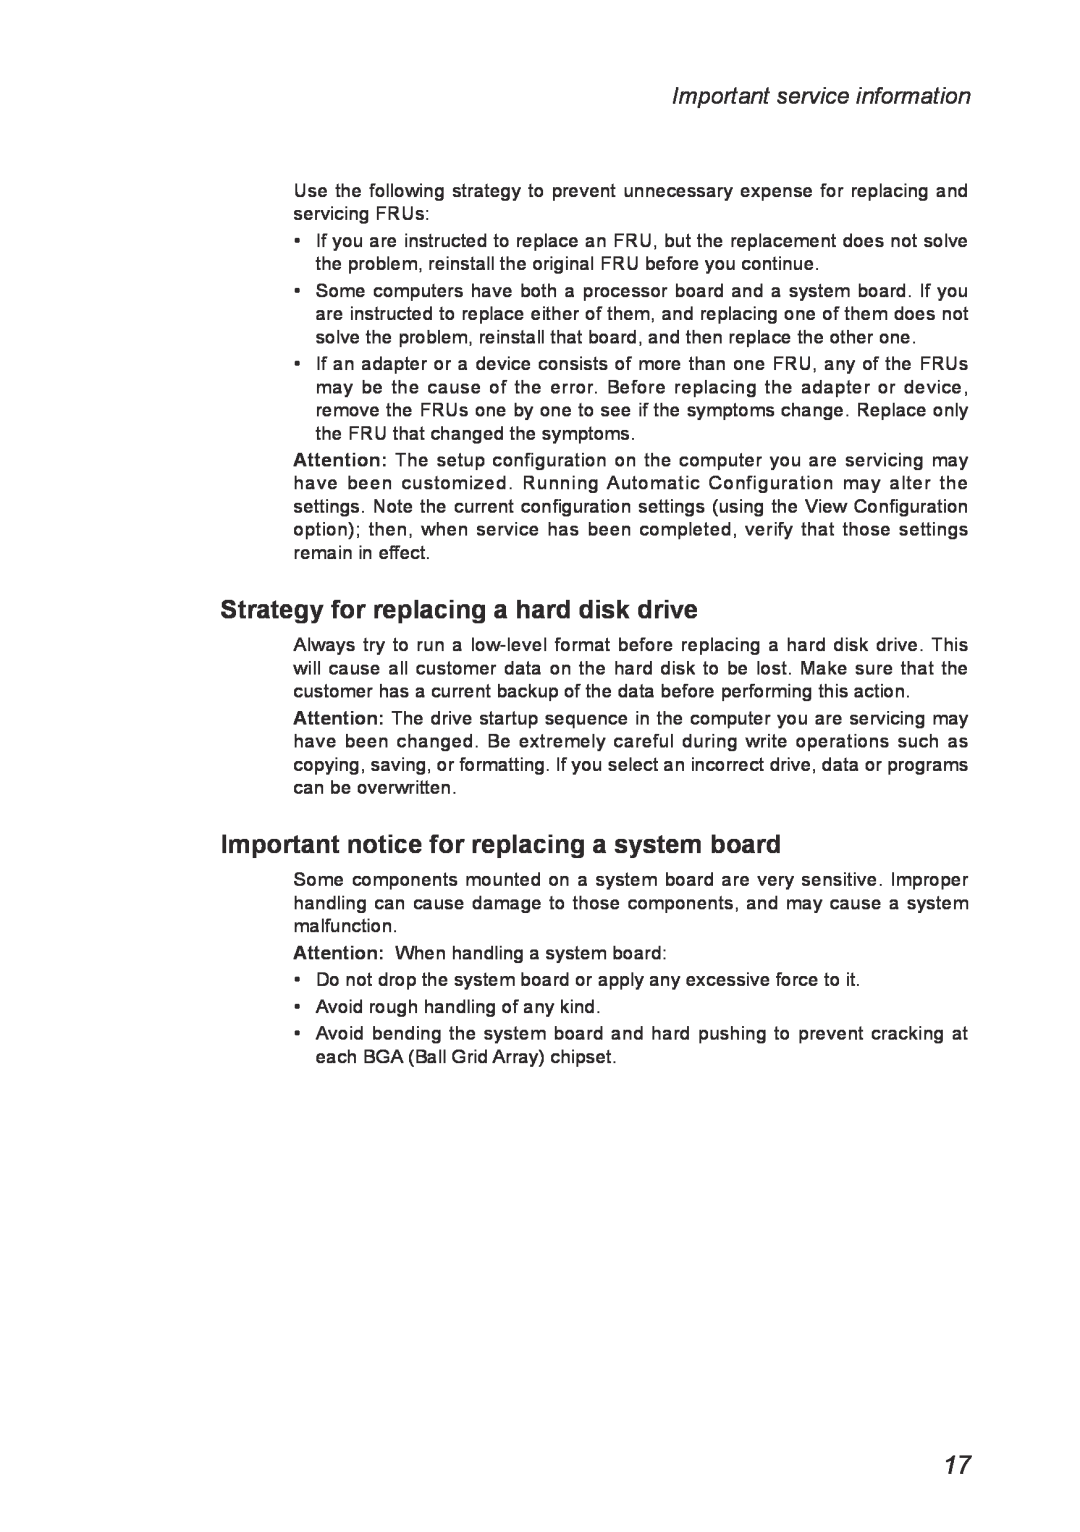 Lenovo U300E manual Strategy for replacing a hard disk drive, Important notice for replacing a system board 